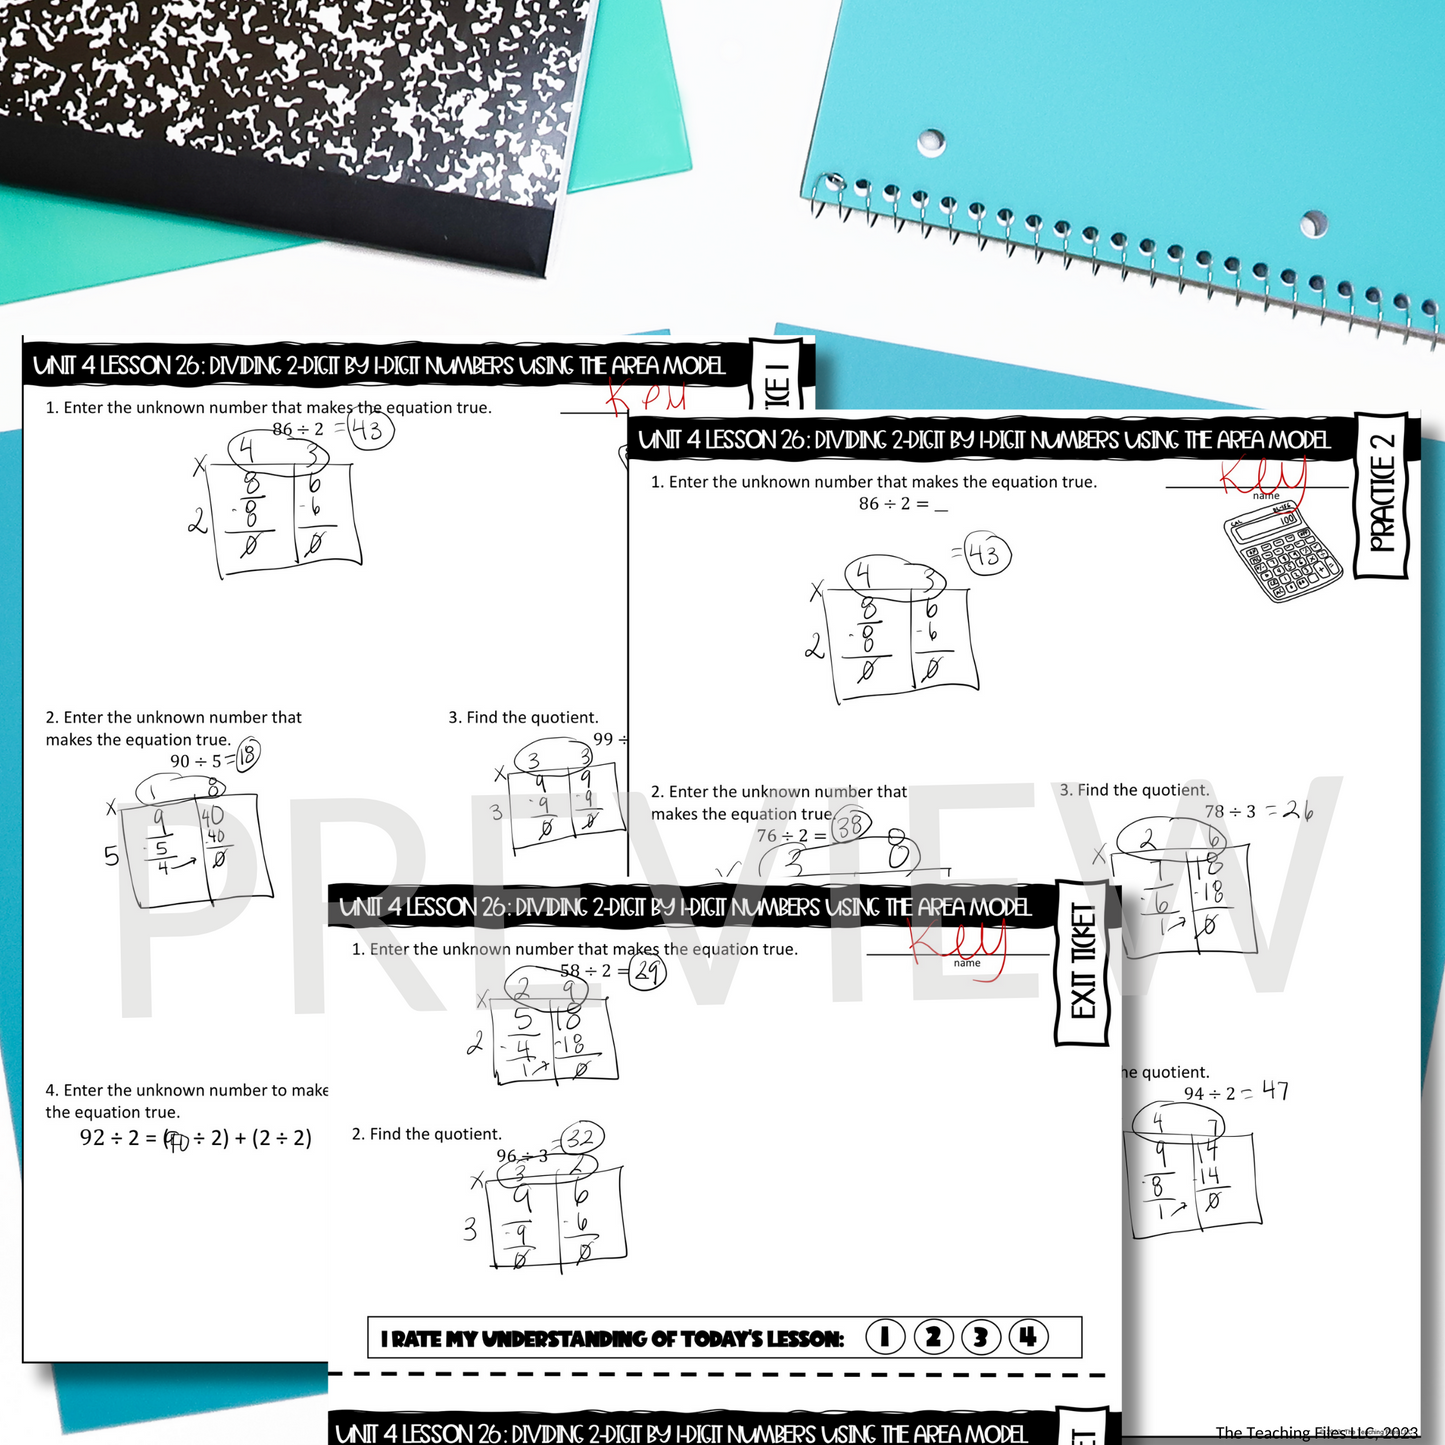 2-Digit by 1-Digit Division Using Area Models | 4th Grade Math Guided Notes Lesson | CCSS-Aligned